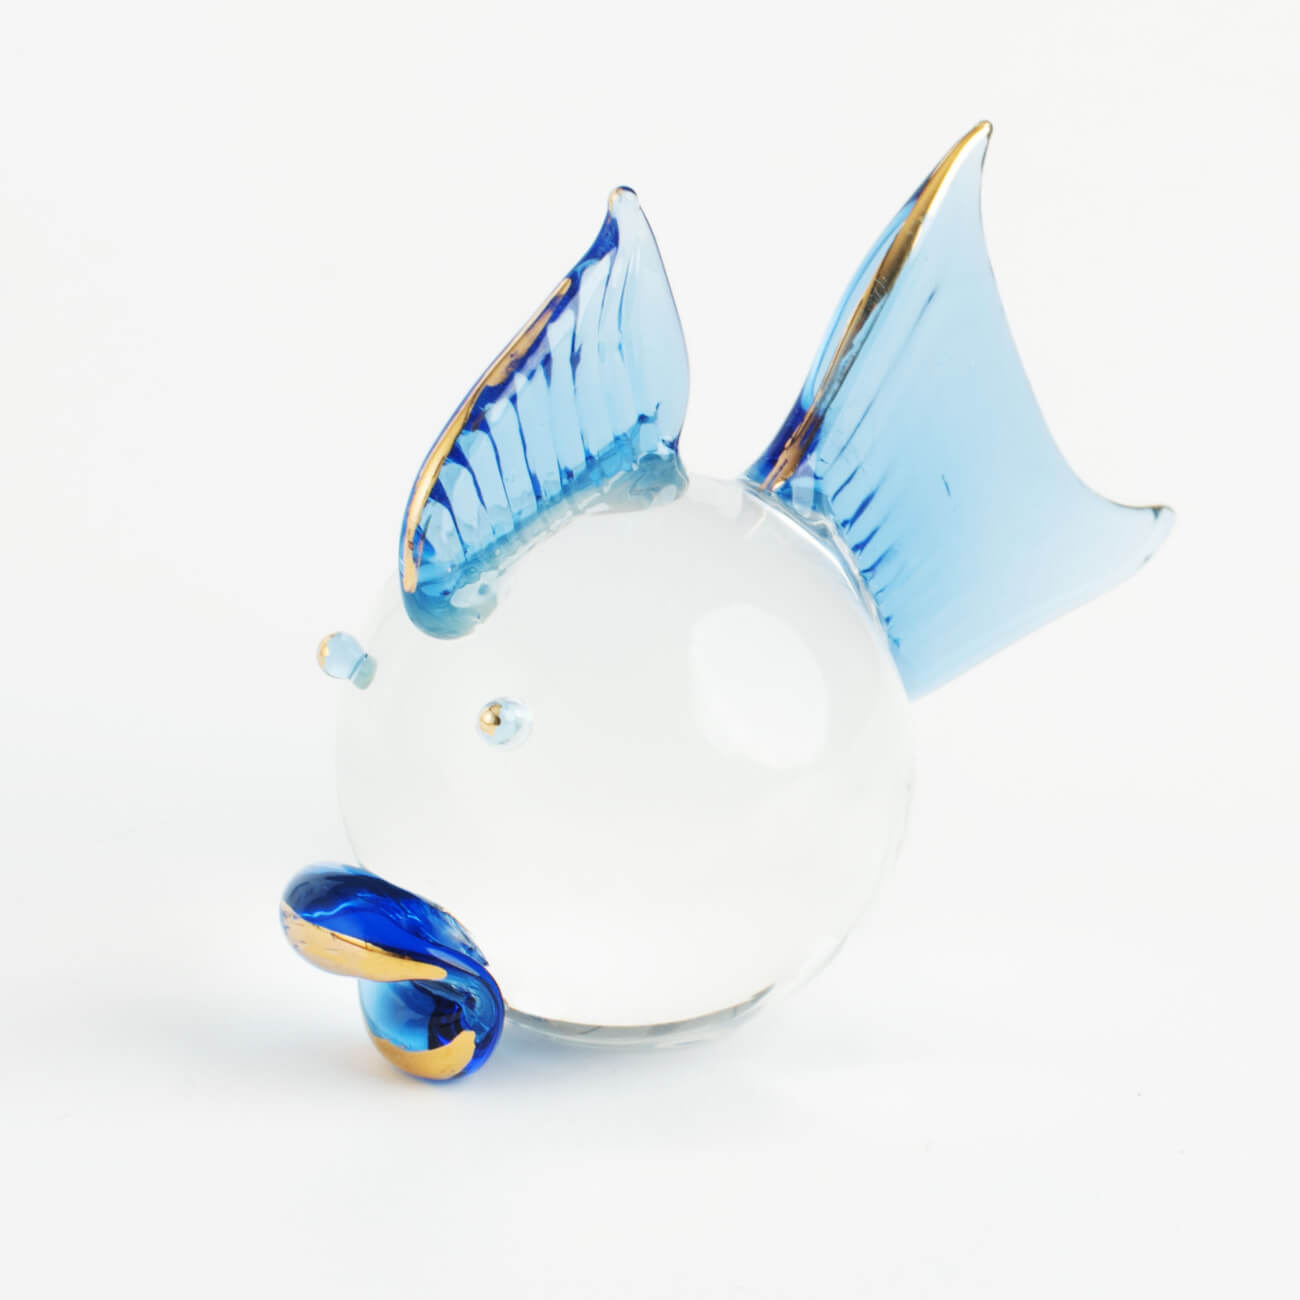 Statuette, 5 cm, glass, Fish with blue fin and tail, Vitreous изображение № 1